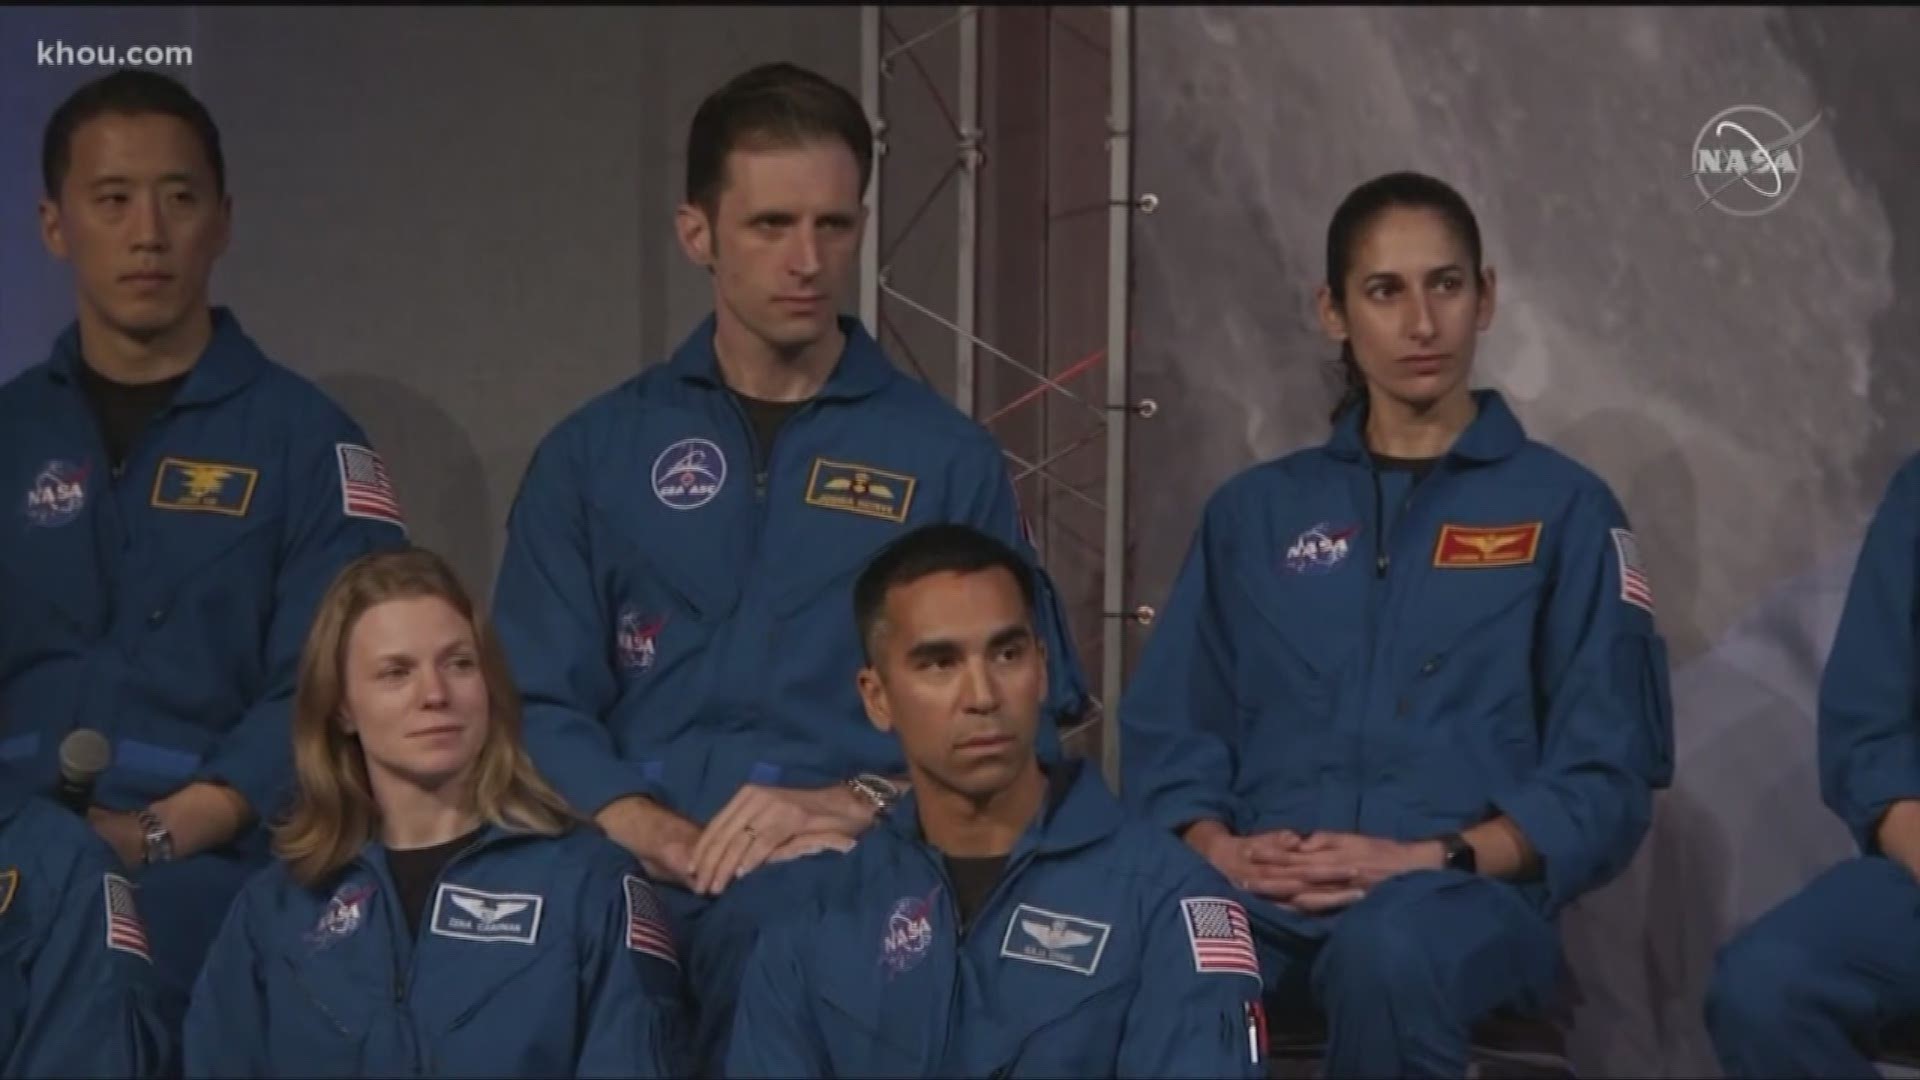 NASA held a ceremony honoring the first astronaut class to graduate under the Artemis program that will send humans back to the moon for the first time since 1